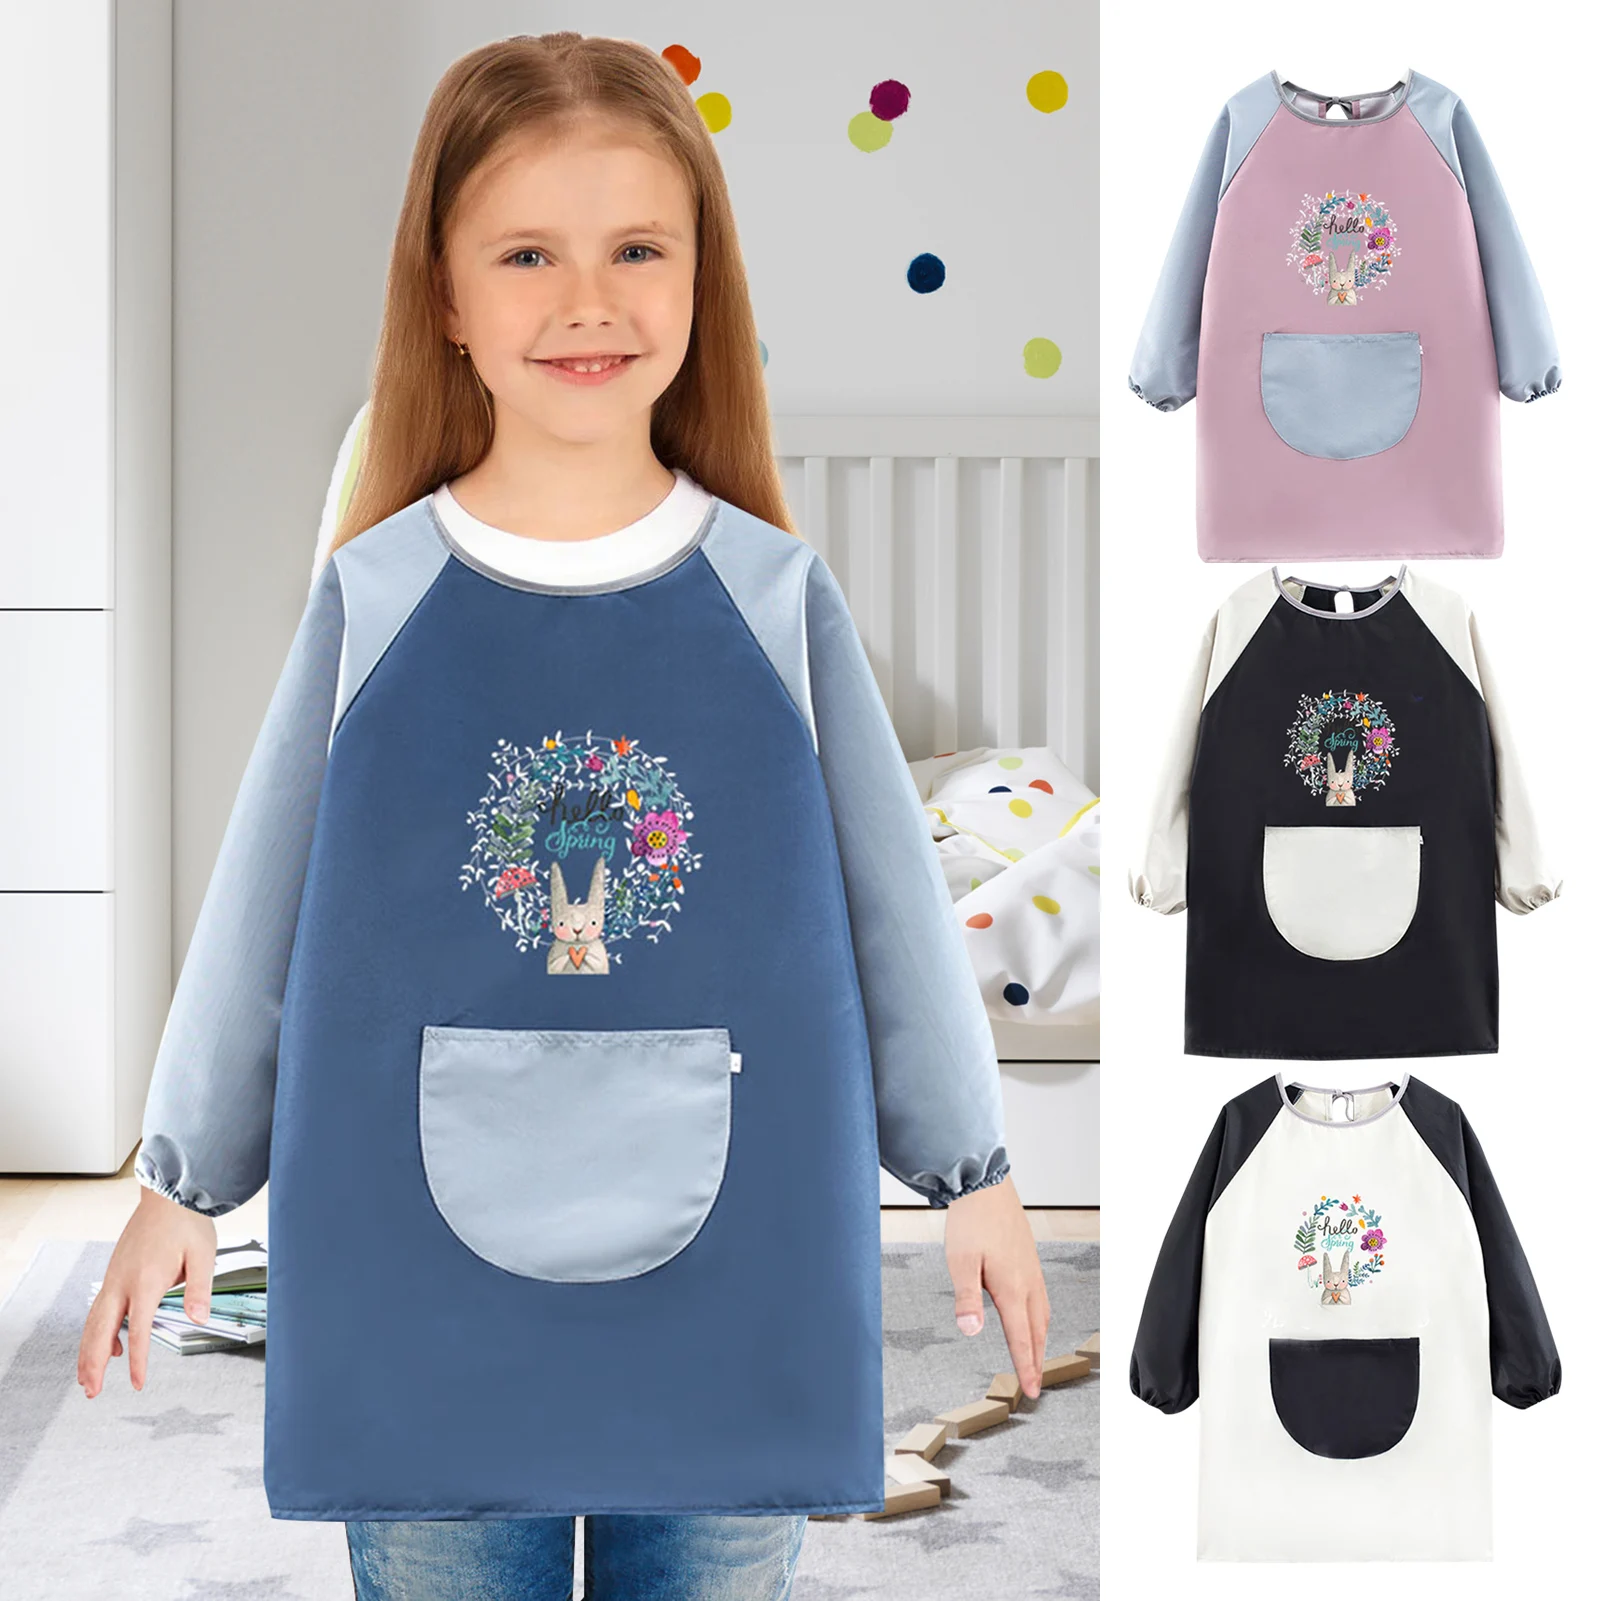 Kids Painting Smocks Children's Waterproof Painting Aprons Craft Apron With  Sleeves And A Big Pocket For School Art Painting - AliExpress